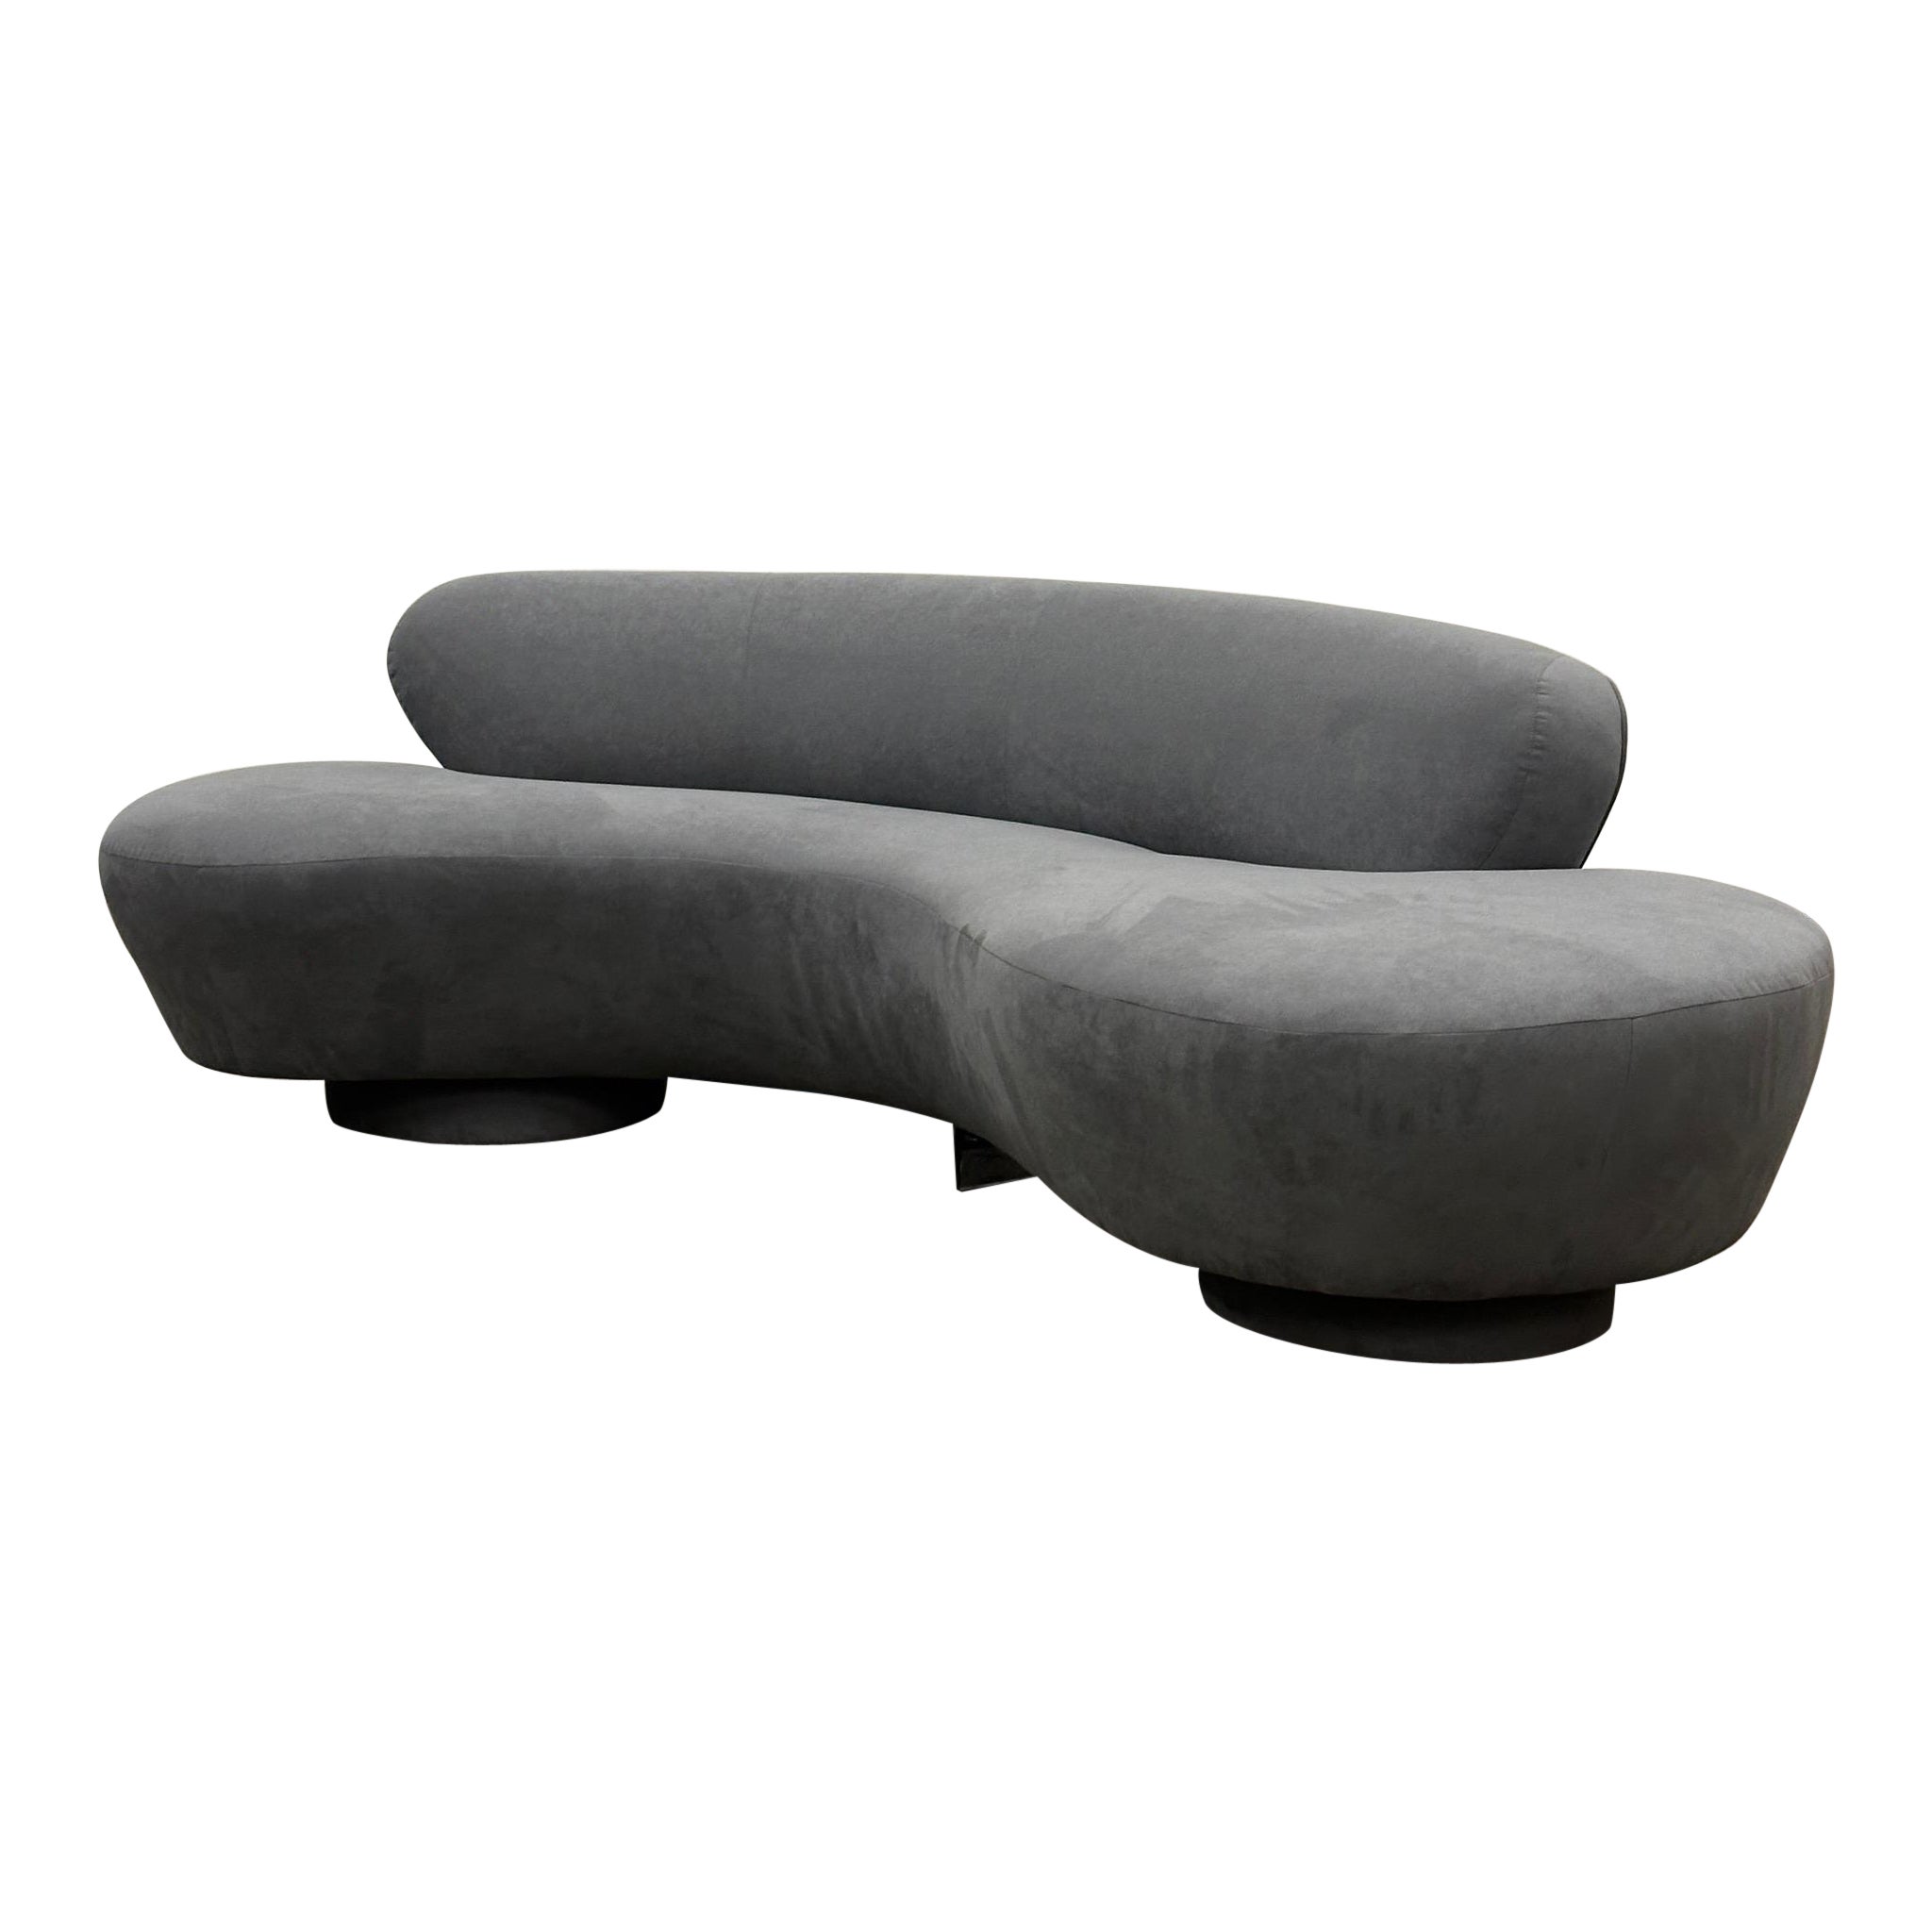 Cloud Serpentine Sofa by Vladimir Kagan for Directional For Sale